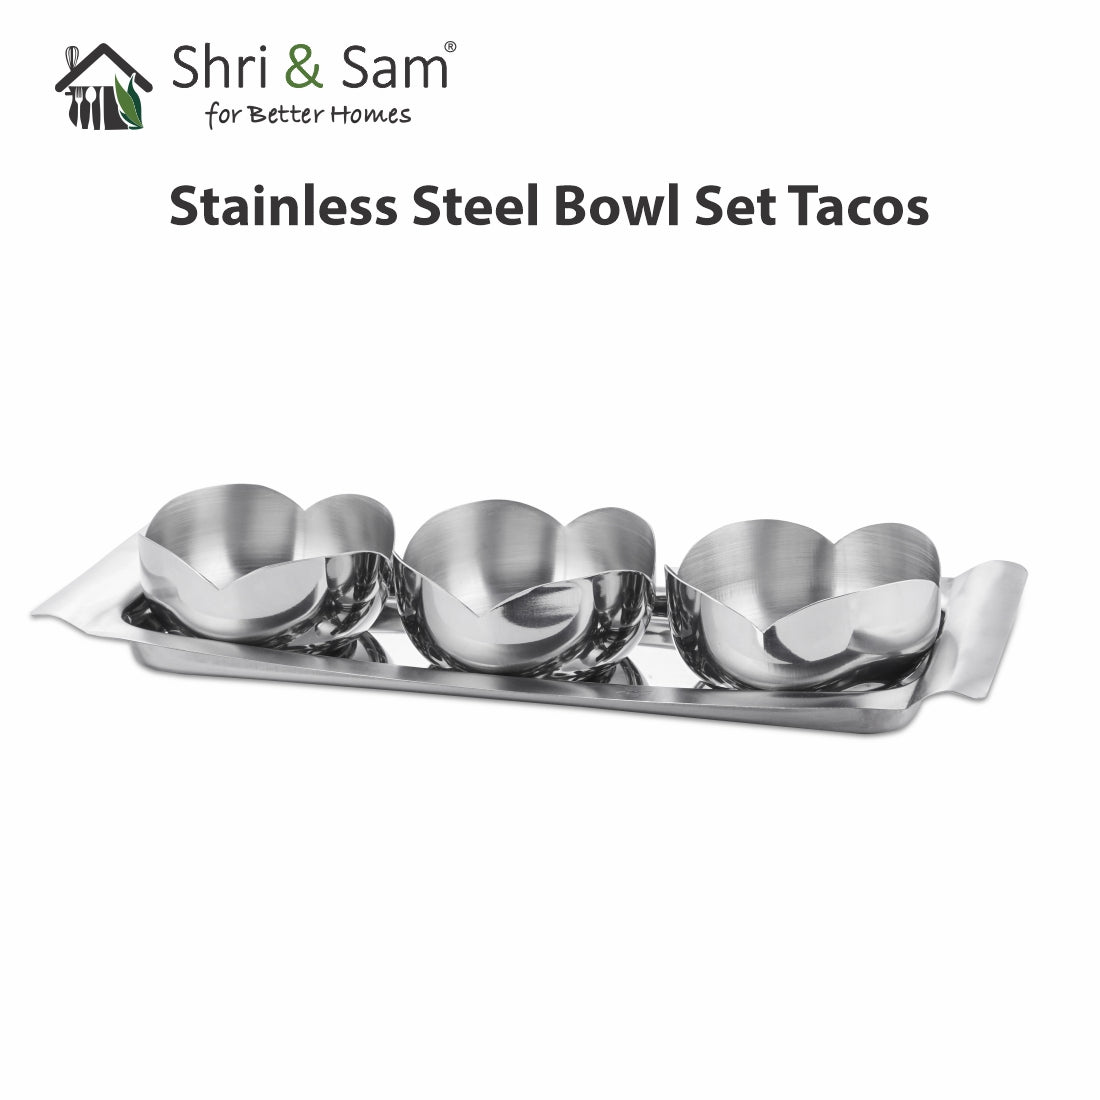 Stainless Steel Bowl Set Tacos